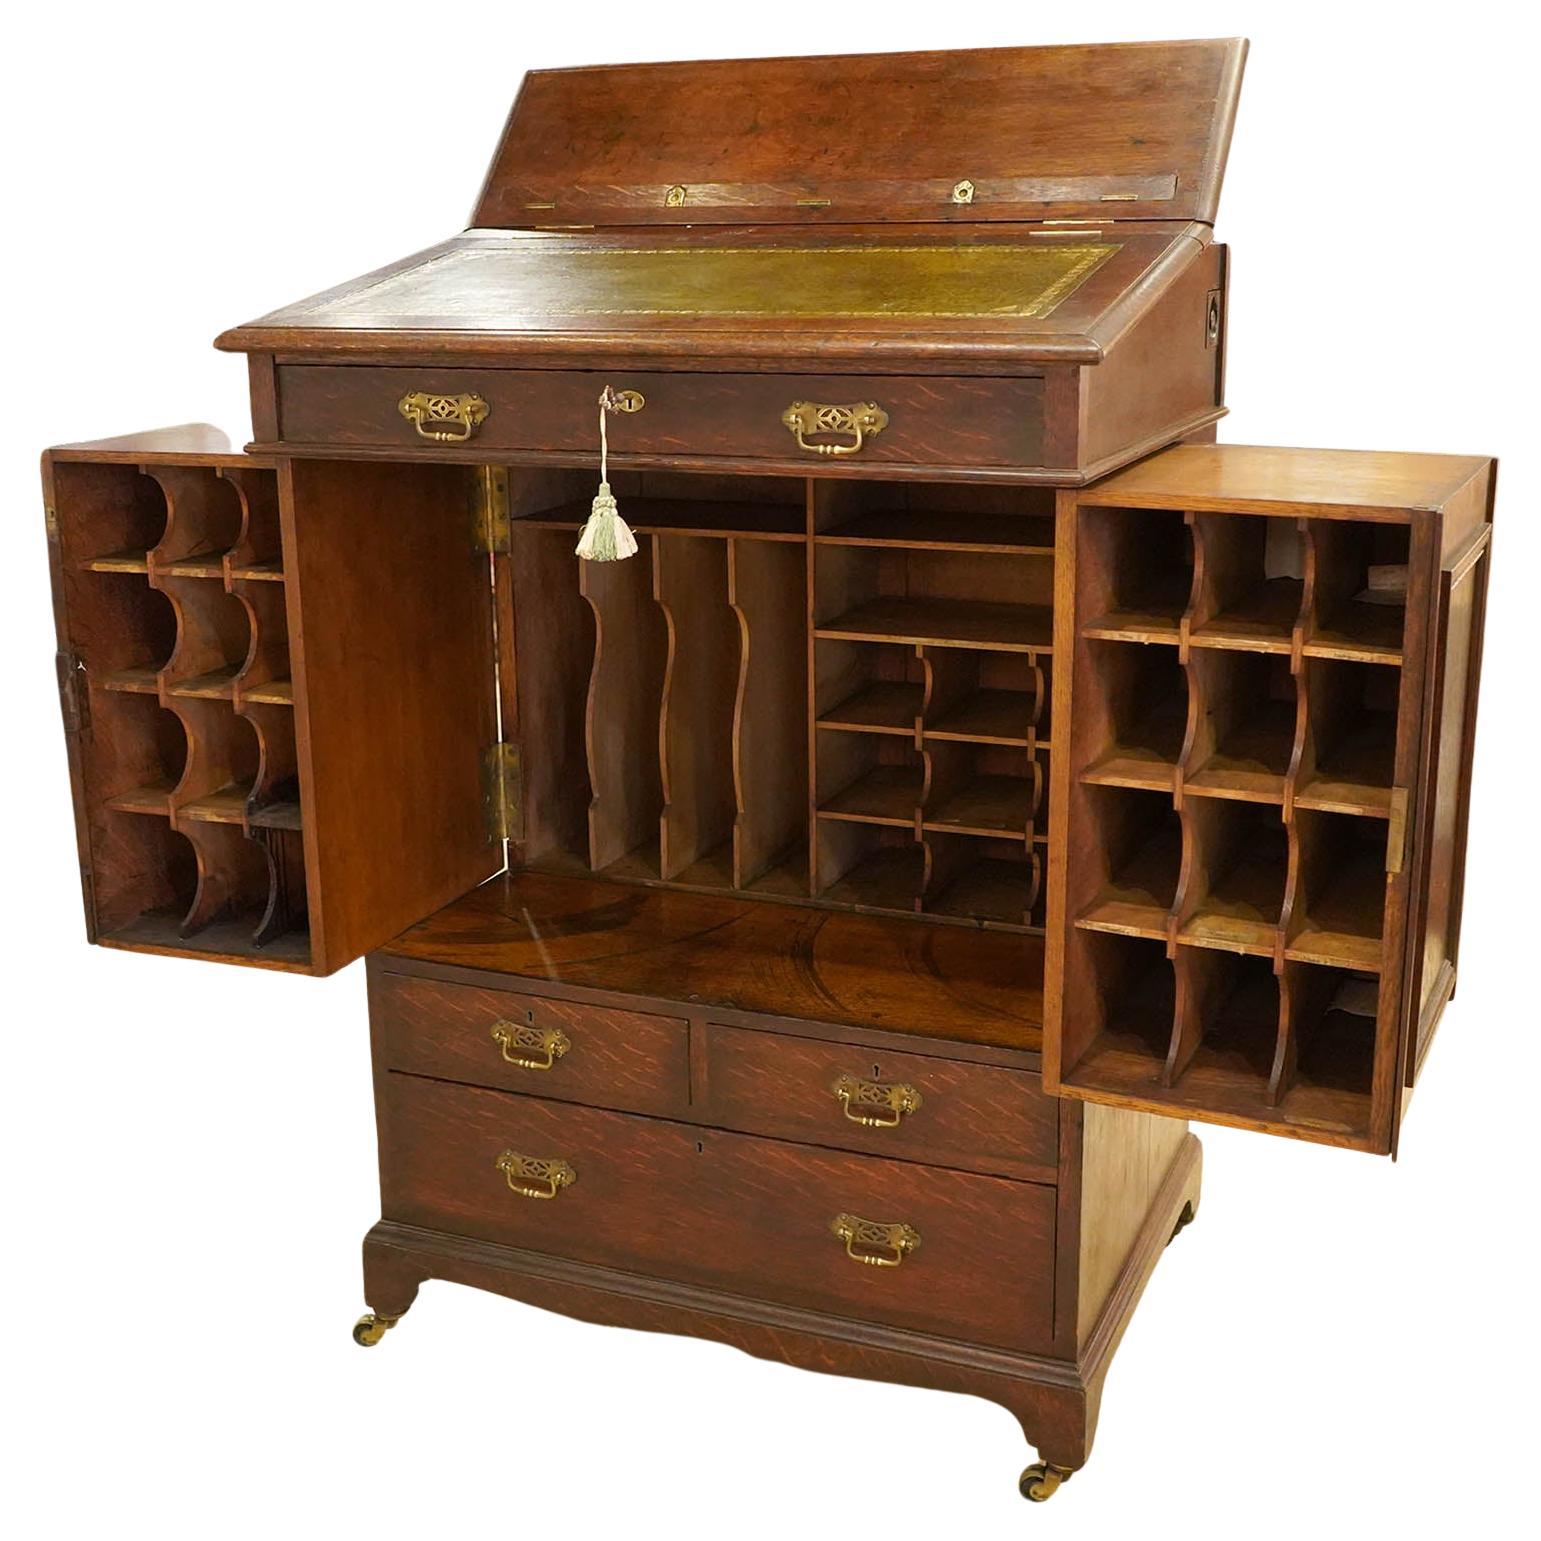 Rare English Oak Wooton Style 19th Century Desk with Rotating Drawers